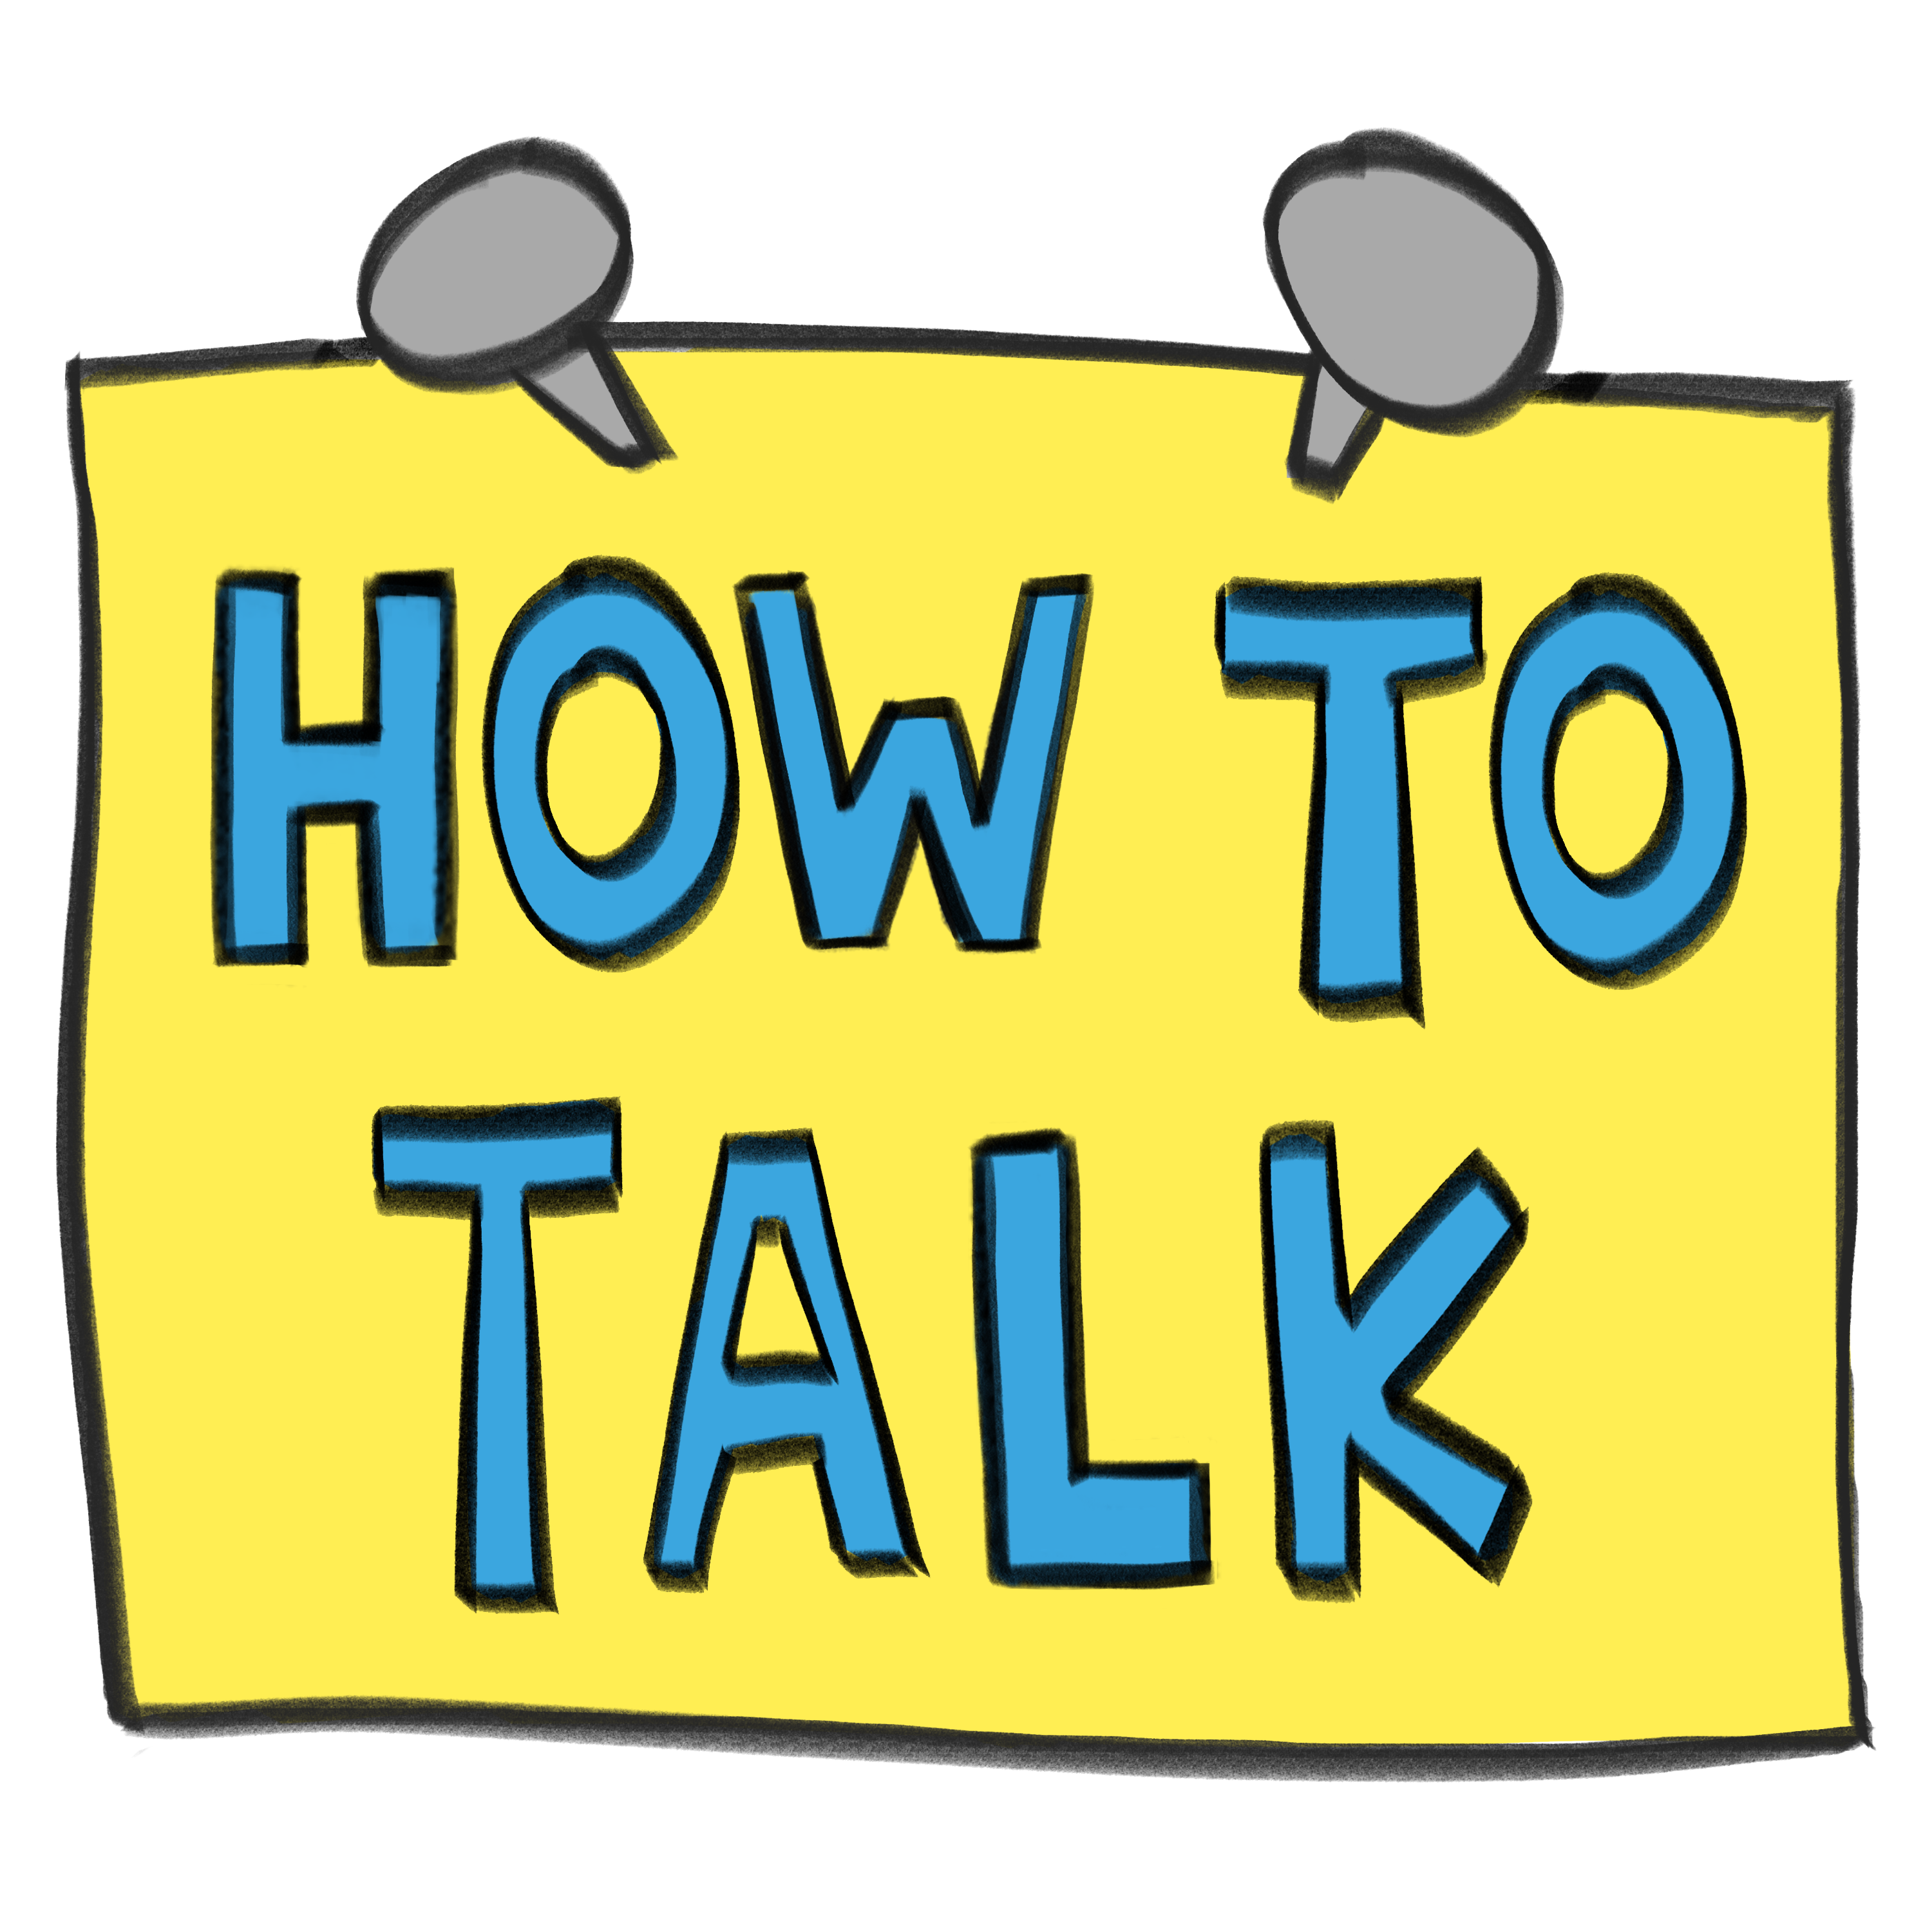 How To Talk app icon